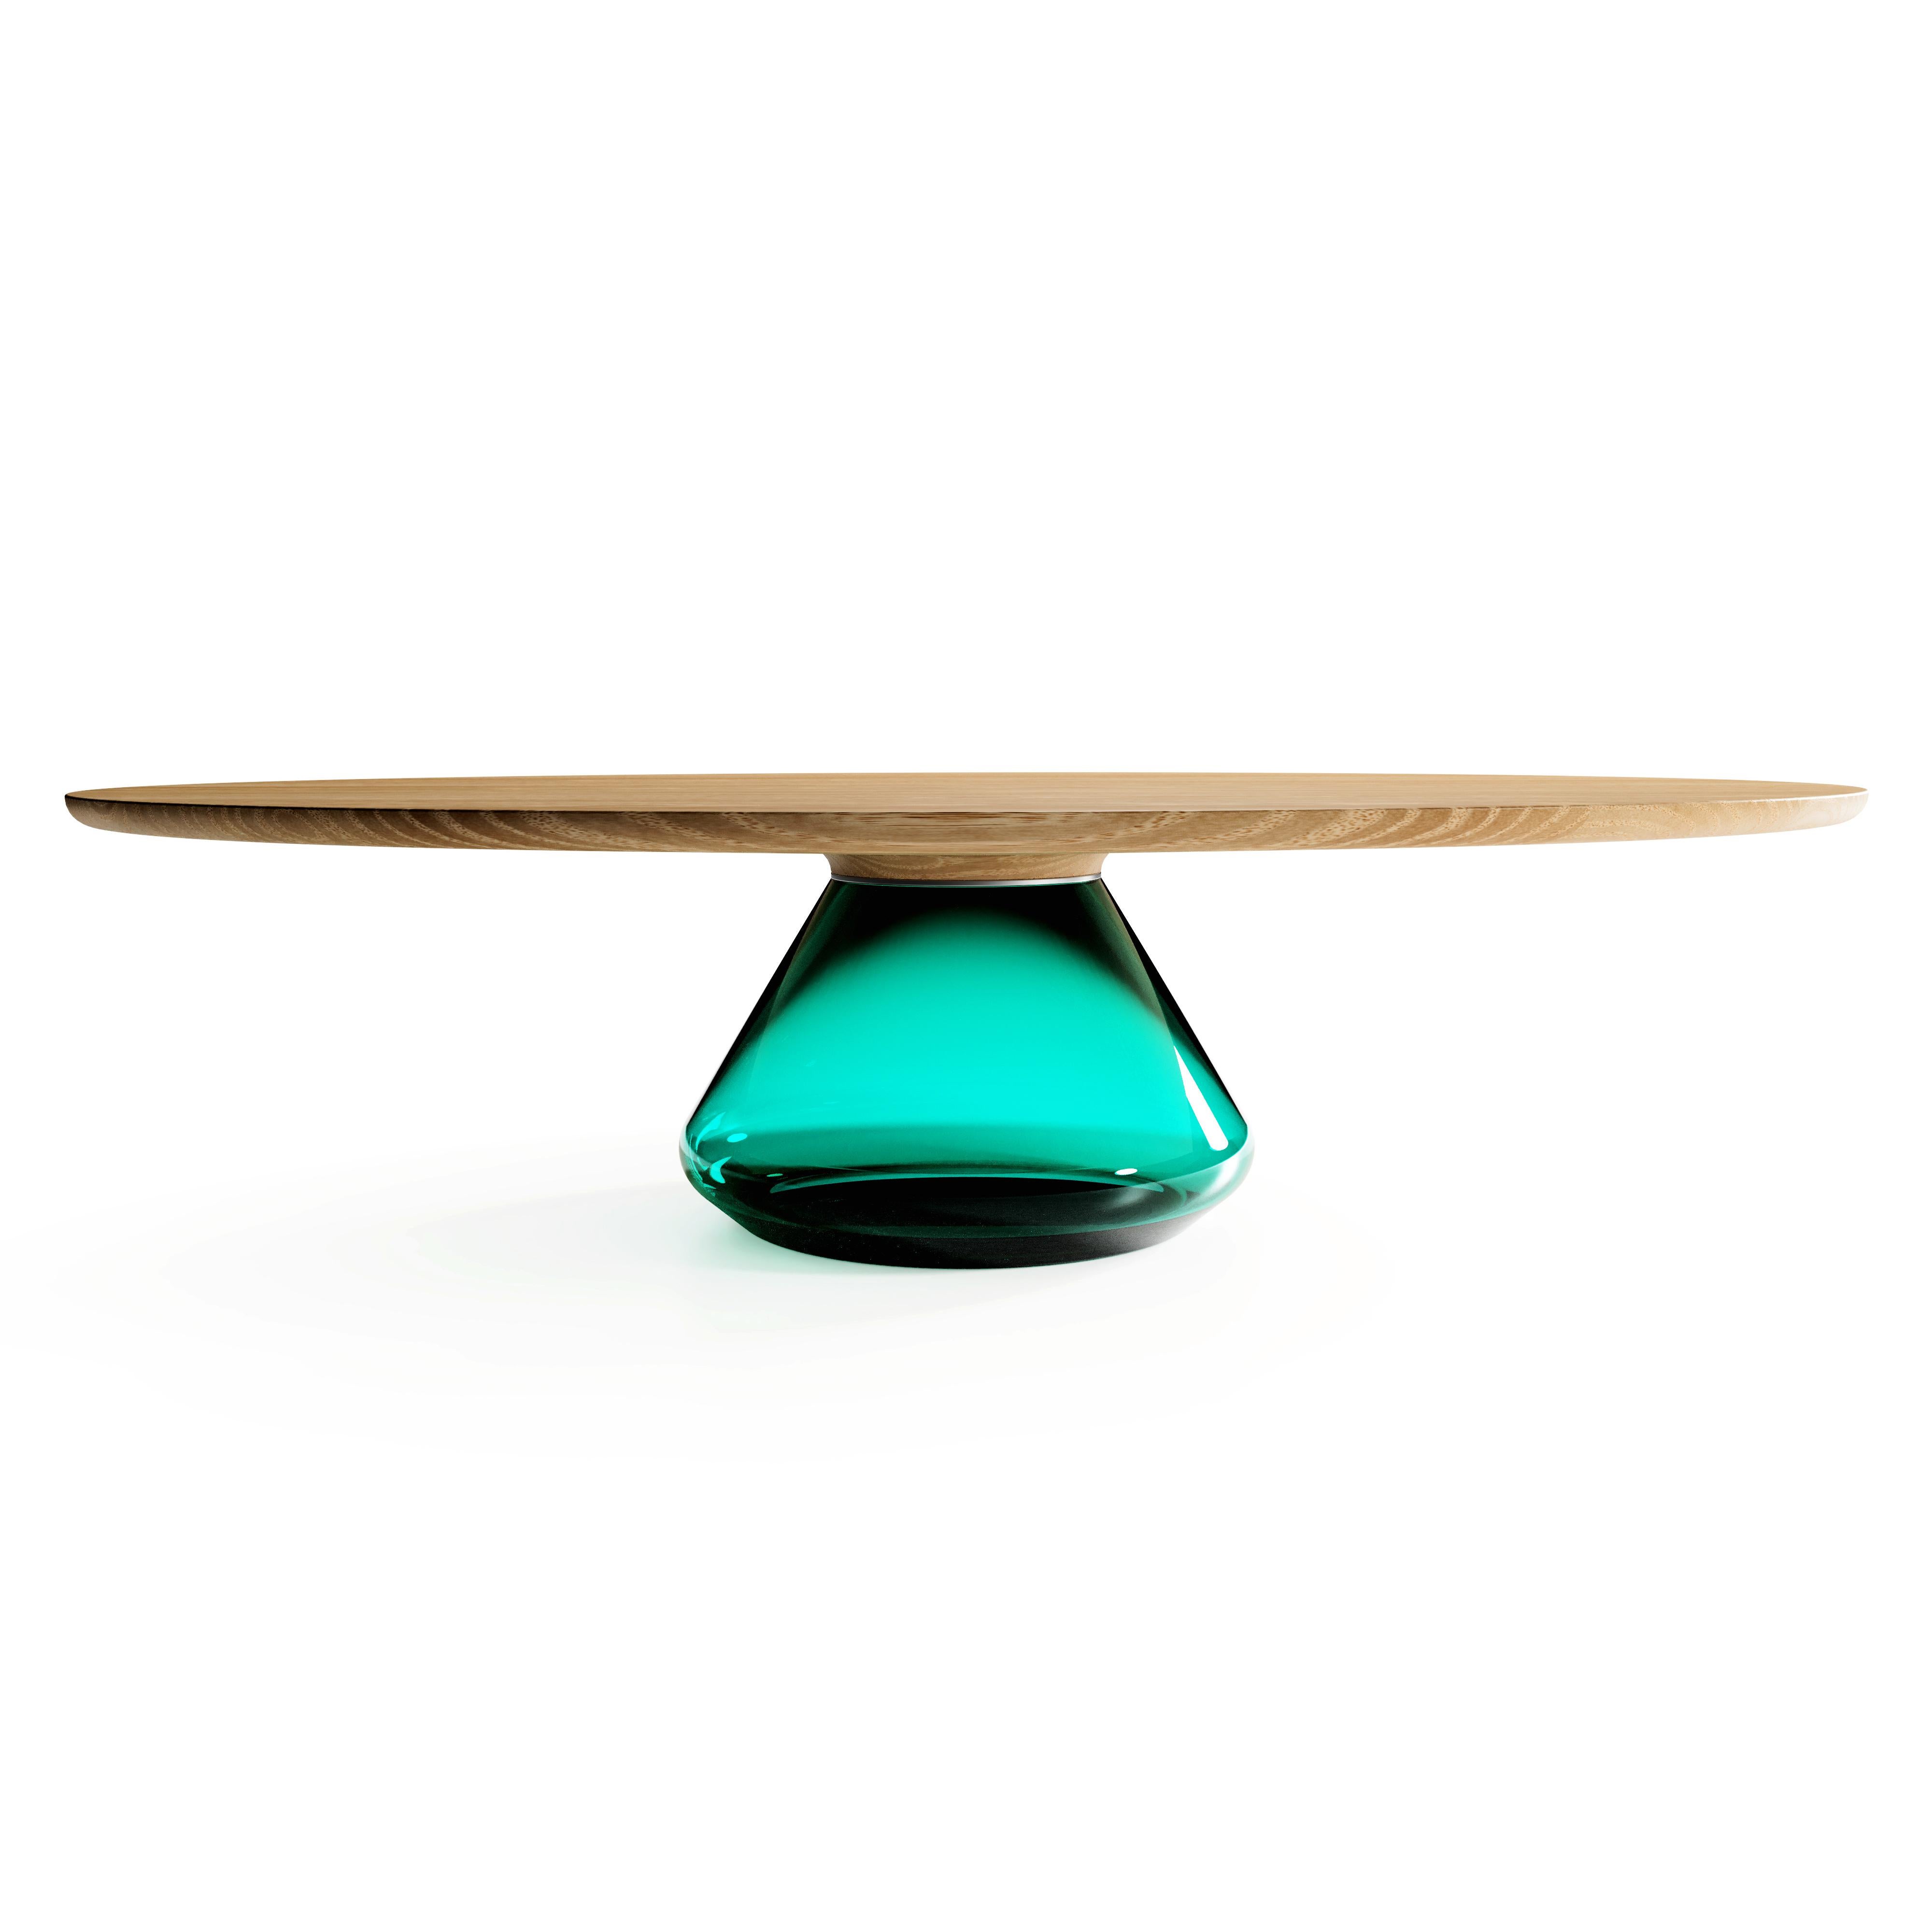 The emerald Eclipse I, limited edition coffee table by Grzegorz Majka
Limited edition of 8
Dimensions: 54 x 48 x 14 in
Materials: Glass, oak

The total eclipse of every interior? With this amazing table everything is possible as with its